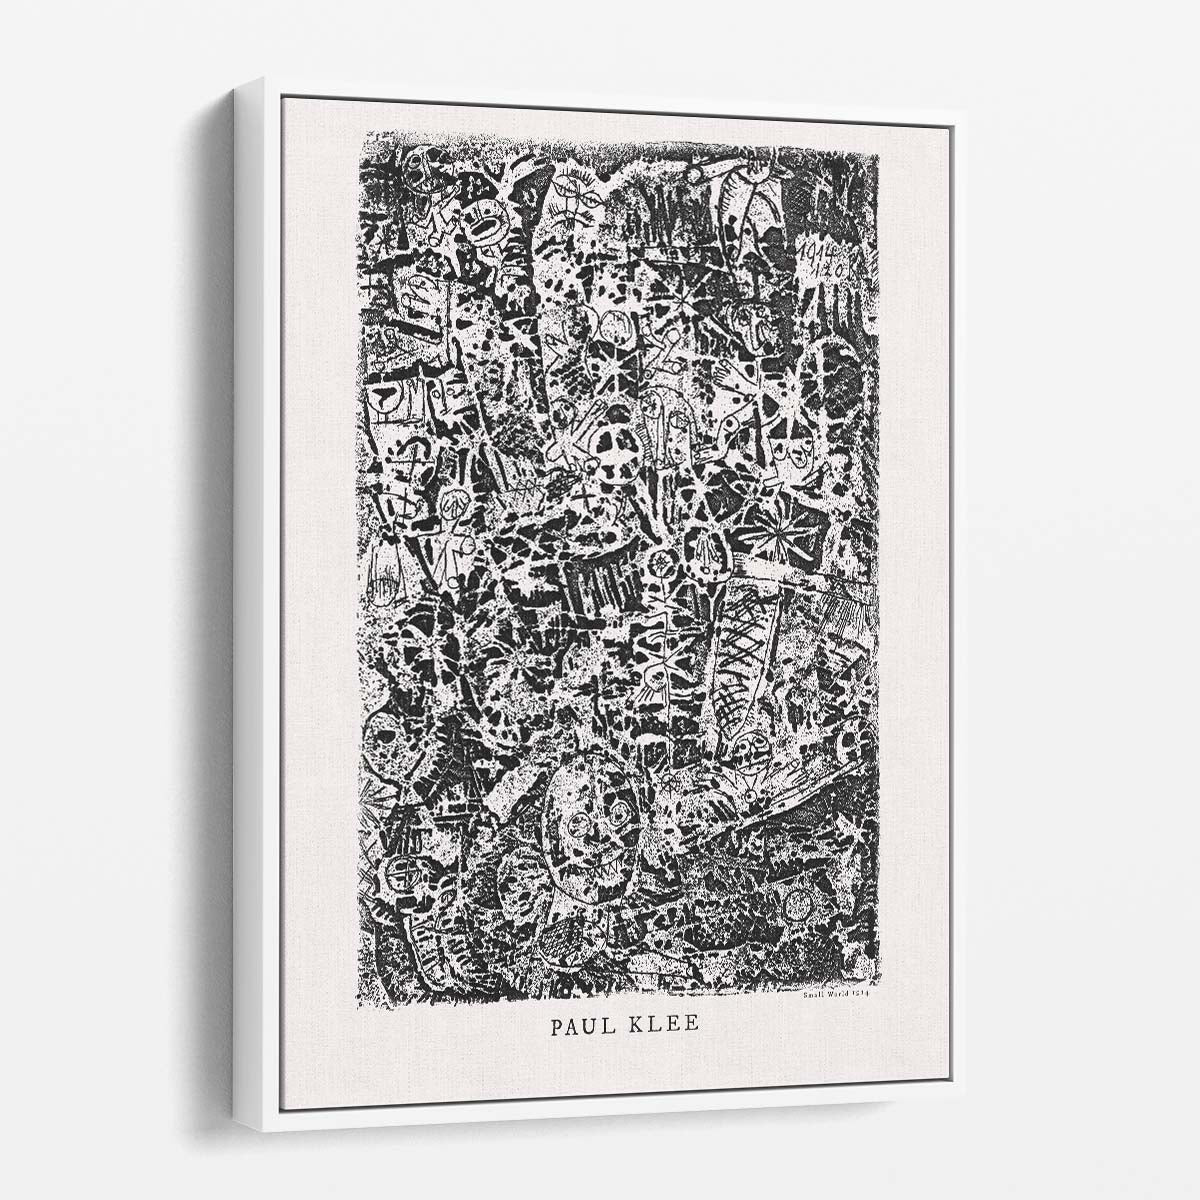 1914 Paul Klee Small World Monochrome Abstract Art Print by Luxuriance Designs, made in USA